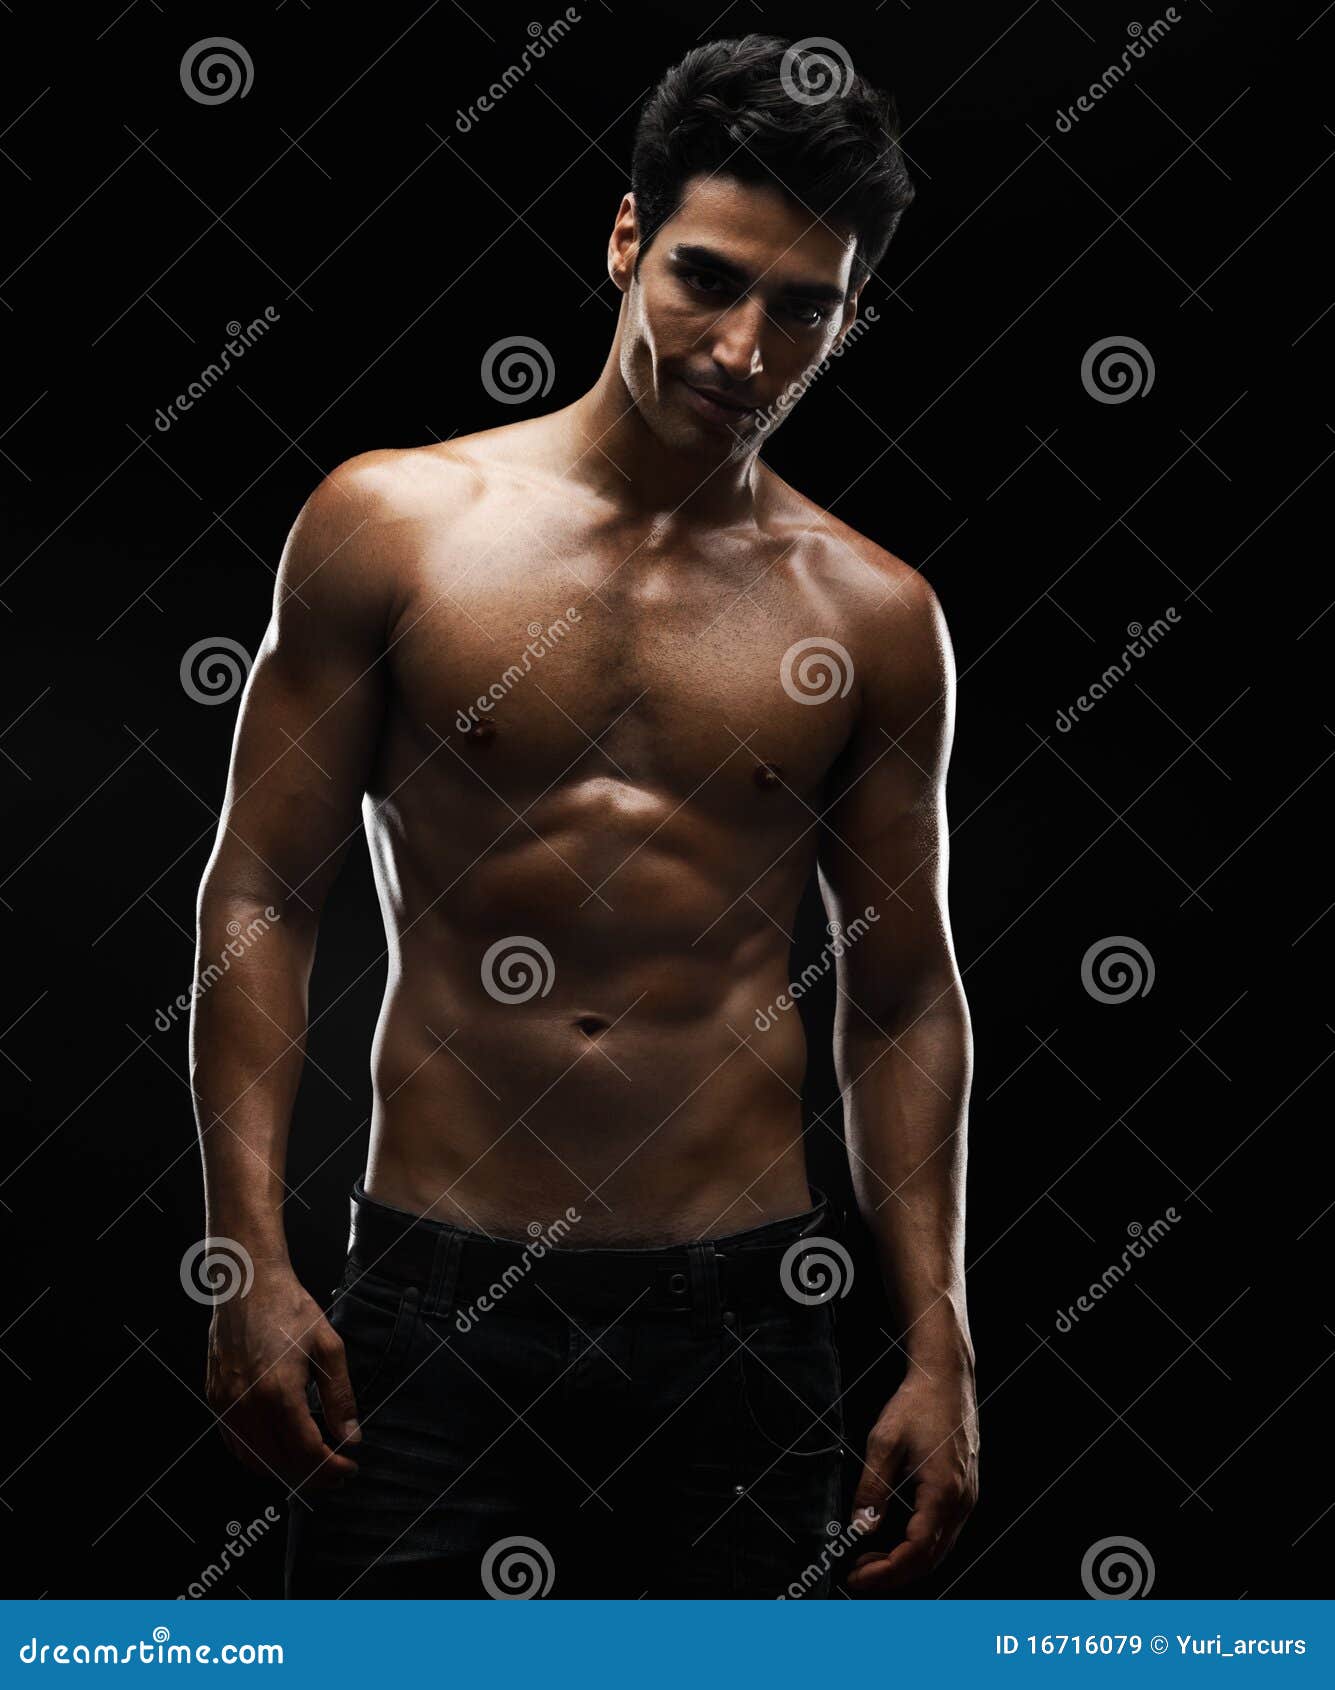 Royalty Free Stock Images: Shirtless macho man against black background ...